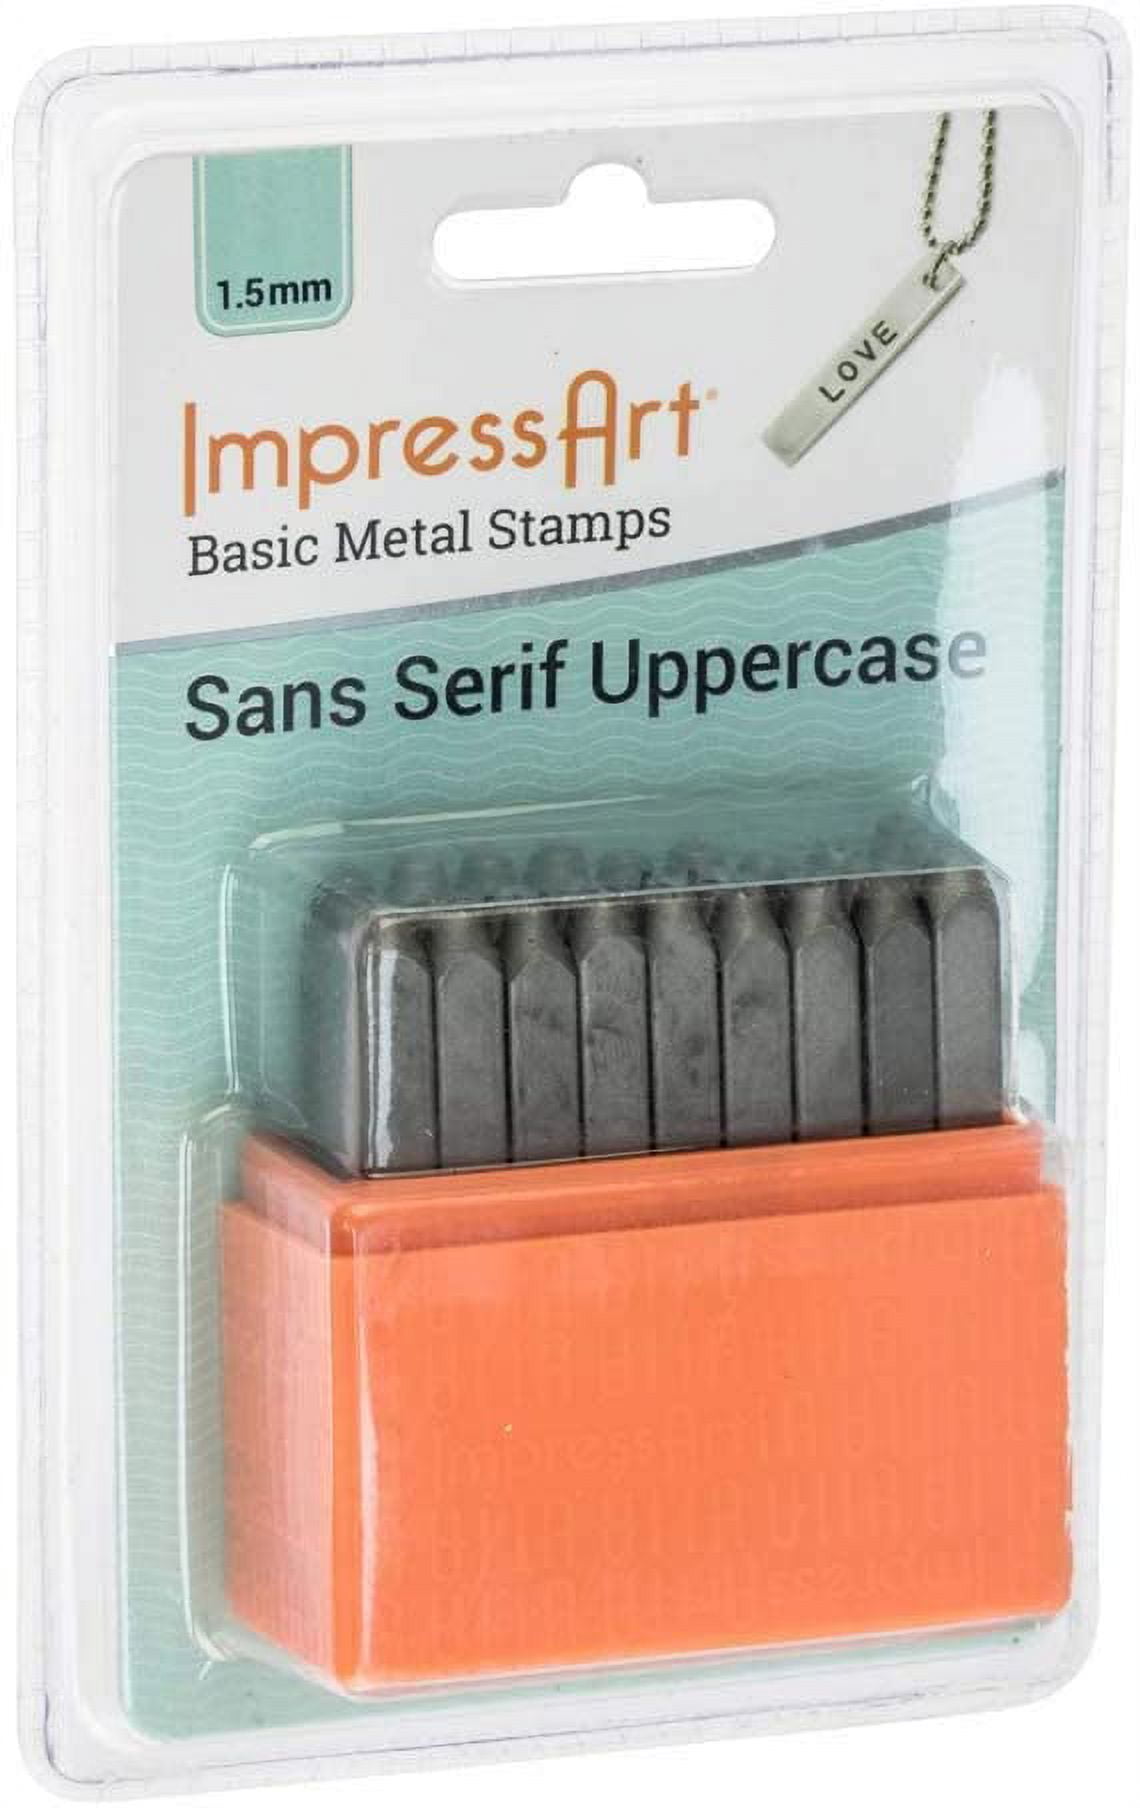 HEART Stamp Pack, Three Metal Stamps ImpressArt Sizes 1.5mm